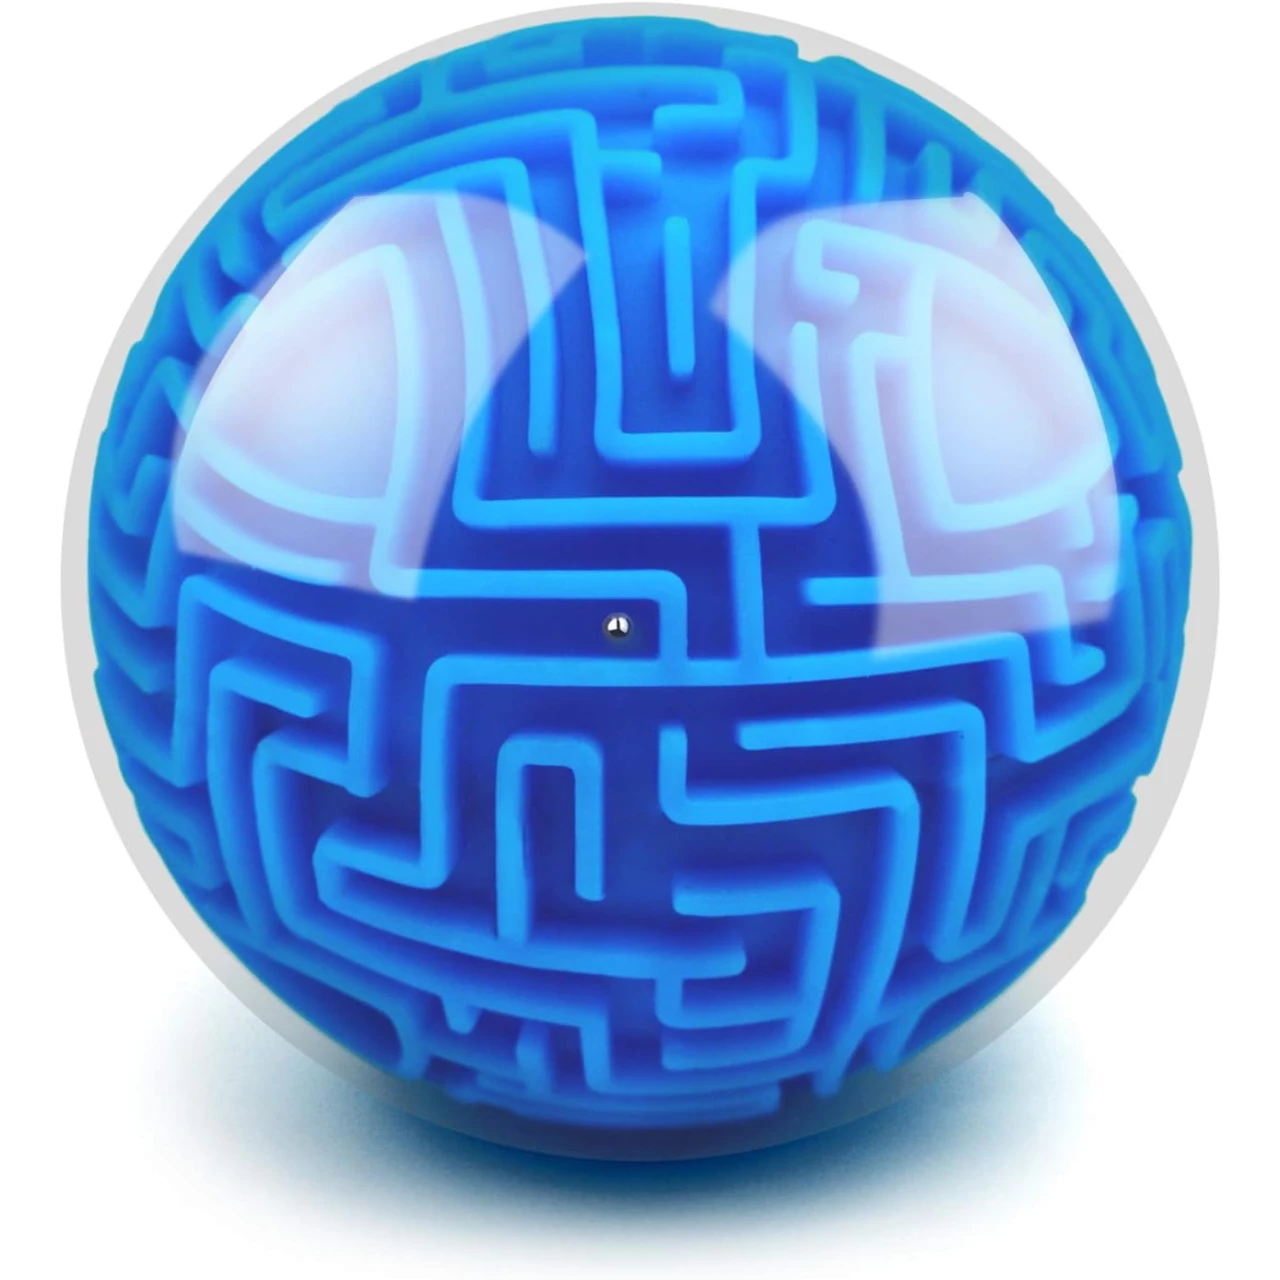 YongnKids Amaze 3D Gravity Memory Sequential Maze Ball Puzzle Toy Gifts for Kids Adults - Challenges Game Lover Tiny Balls Brain Teasers Game (Blue)